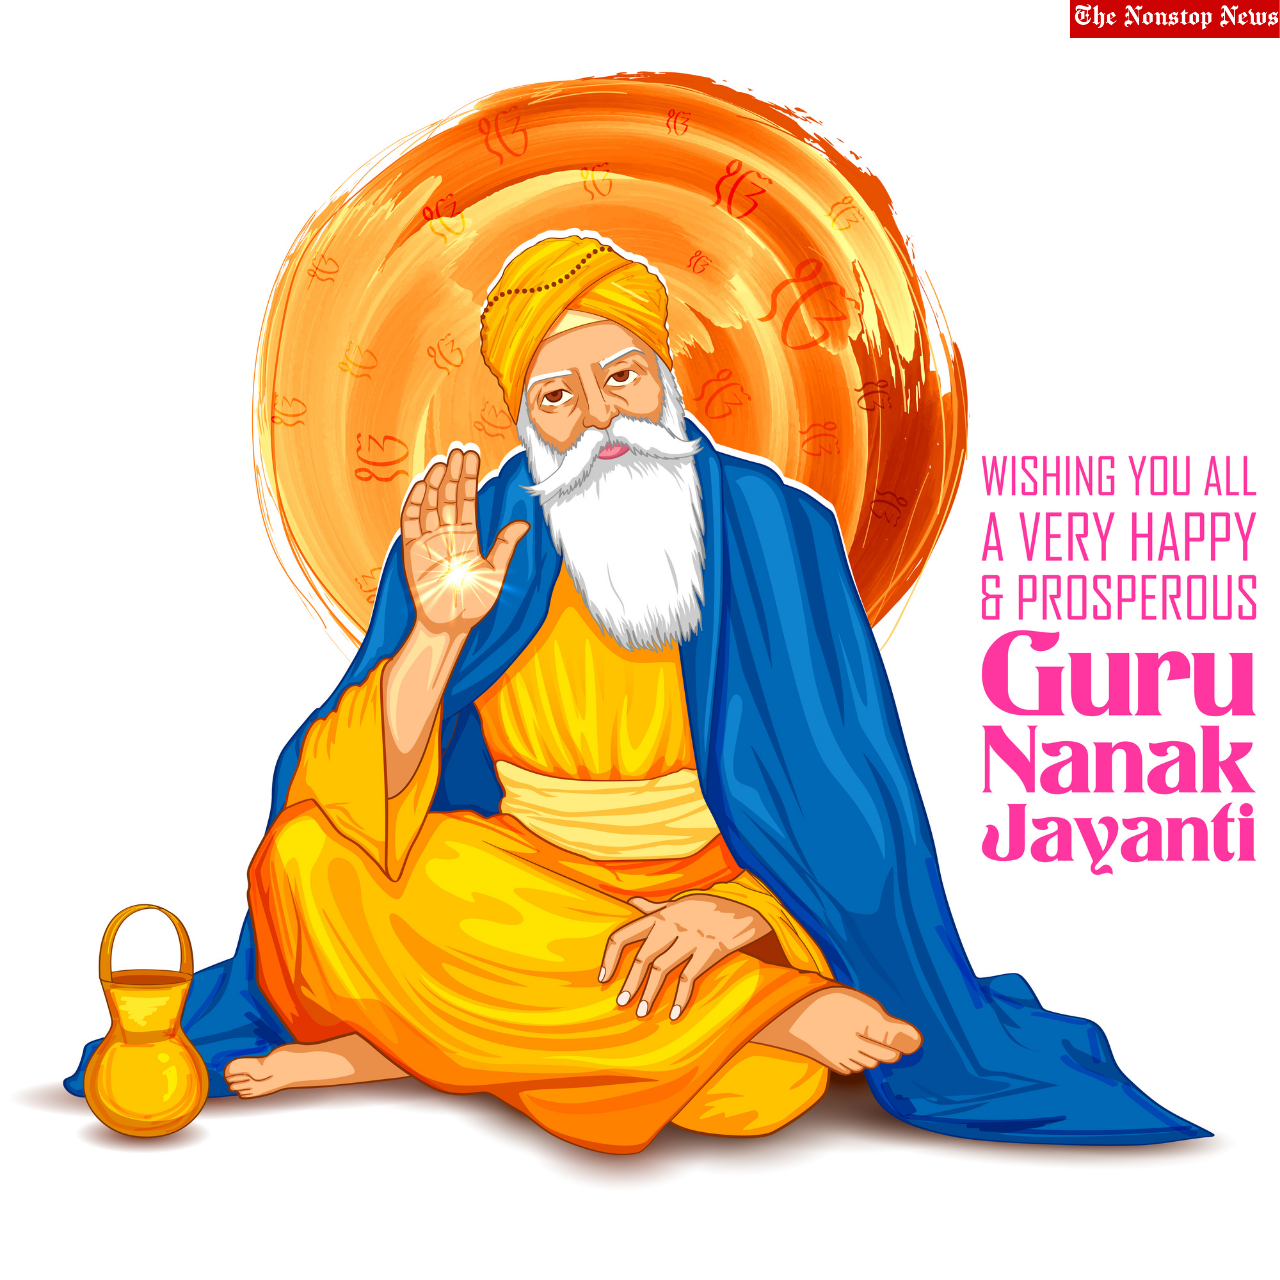 Guru Nanak Jayanti 2021 Quotes, Wishes, HD Images, Greetings, Messages, and Slogans to greet your loved ones